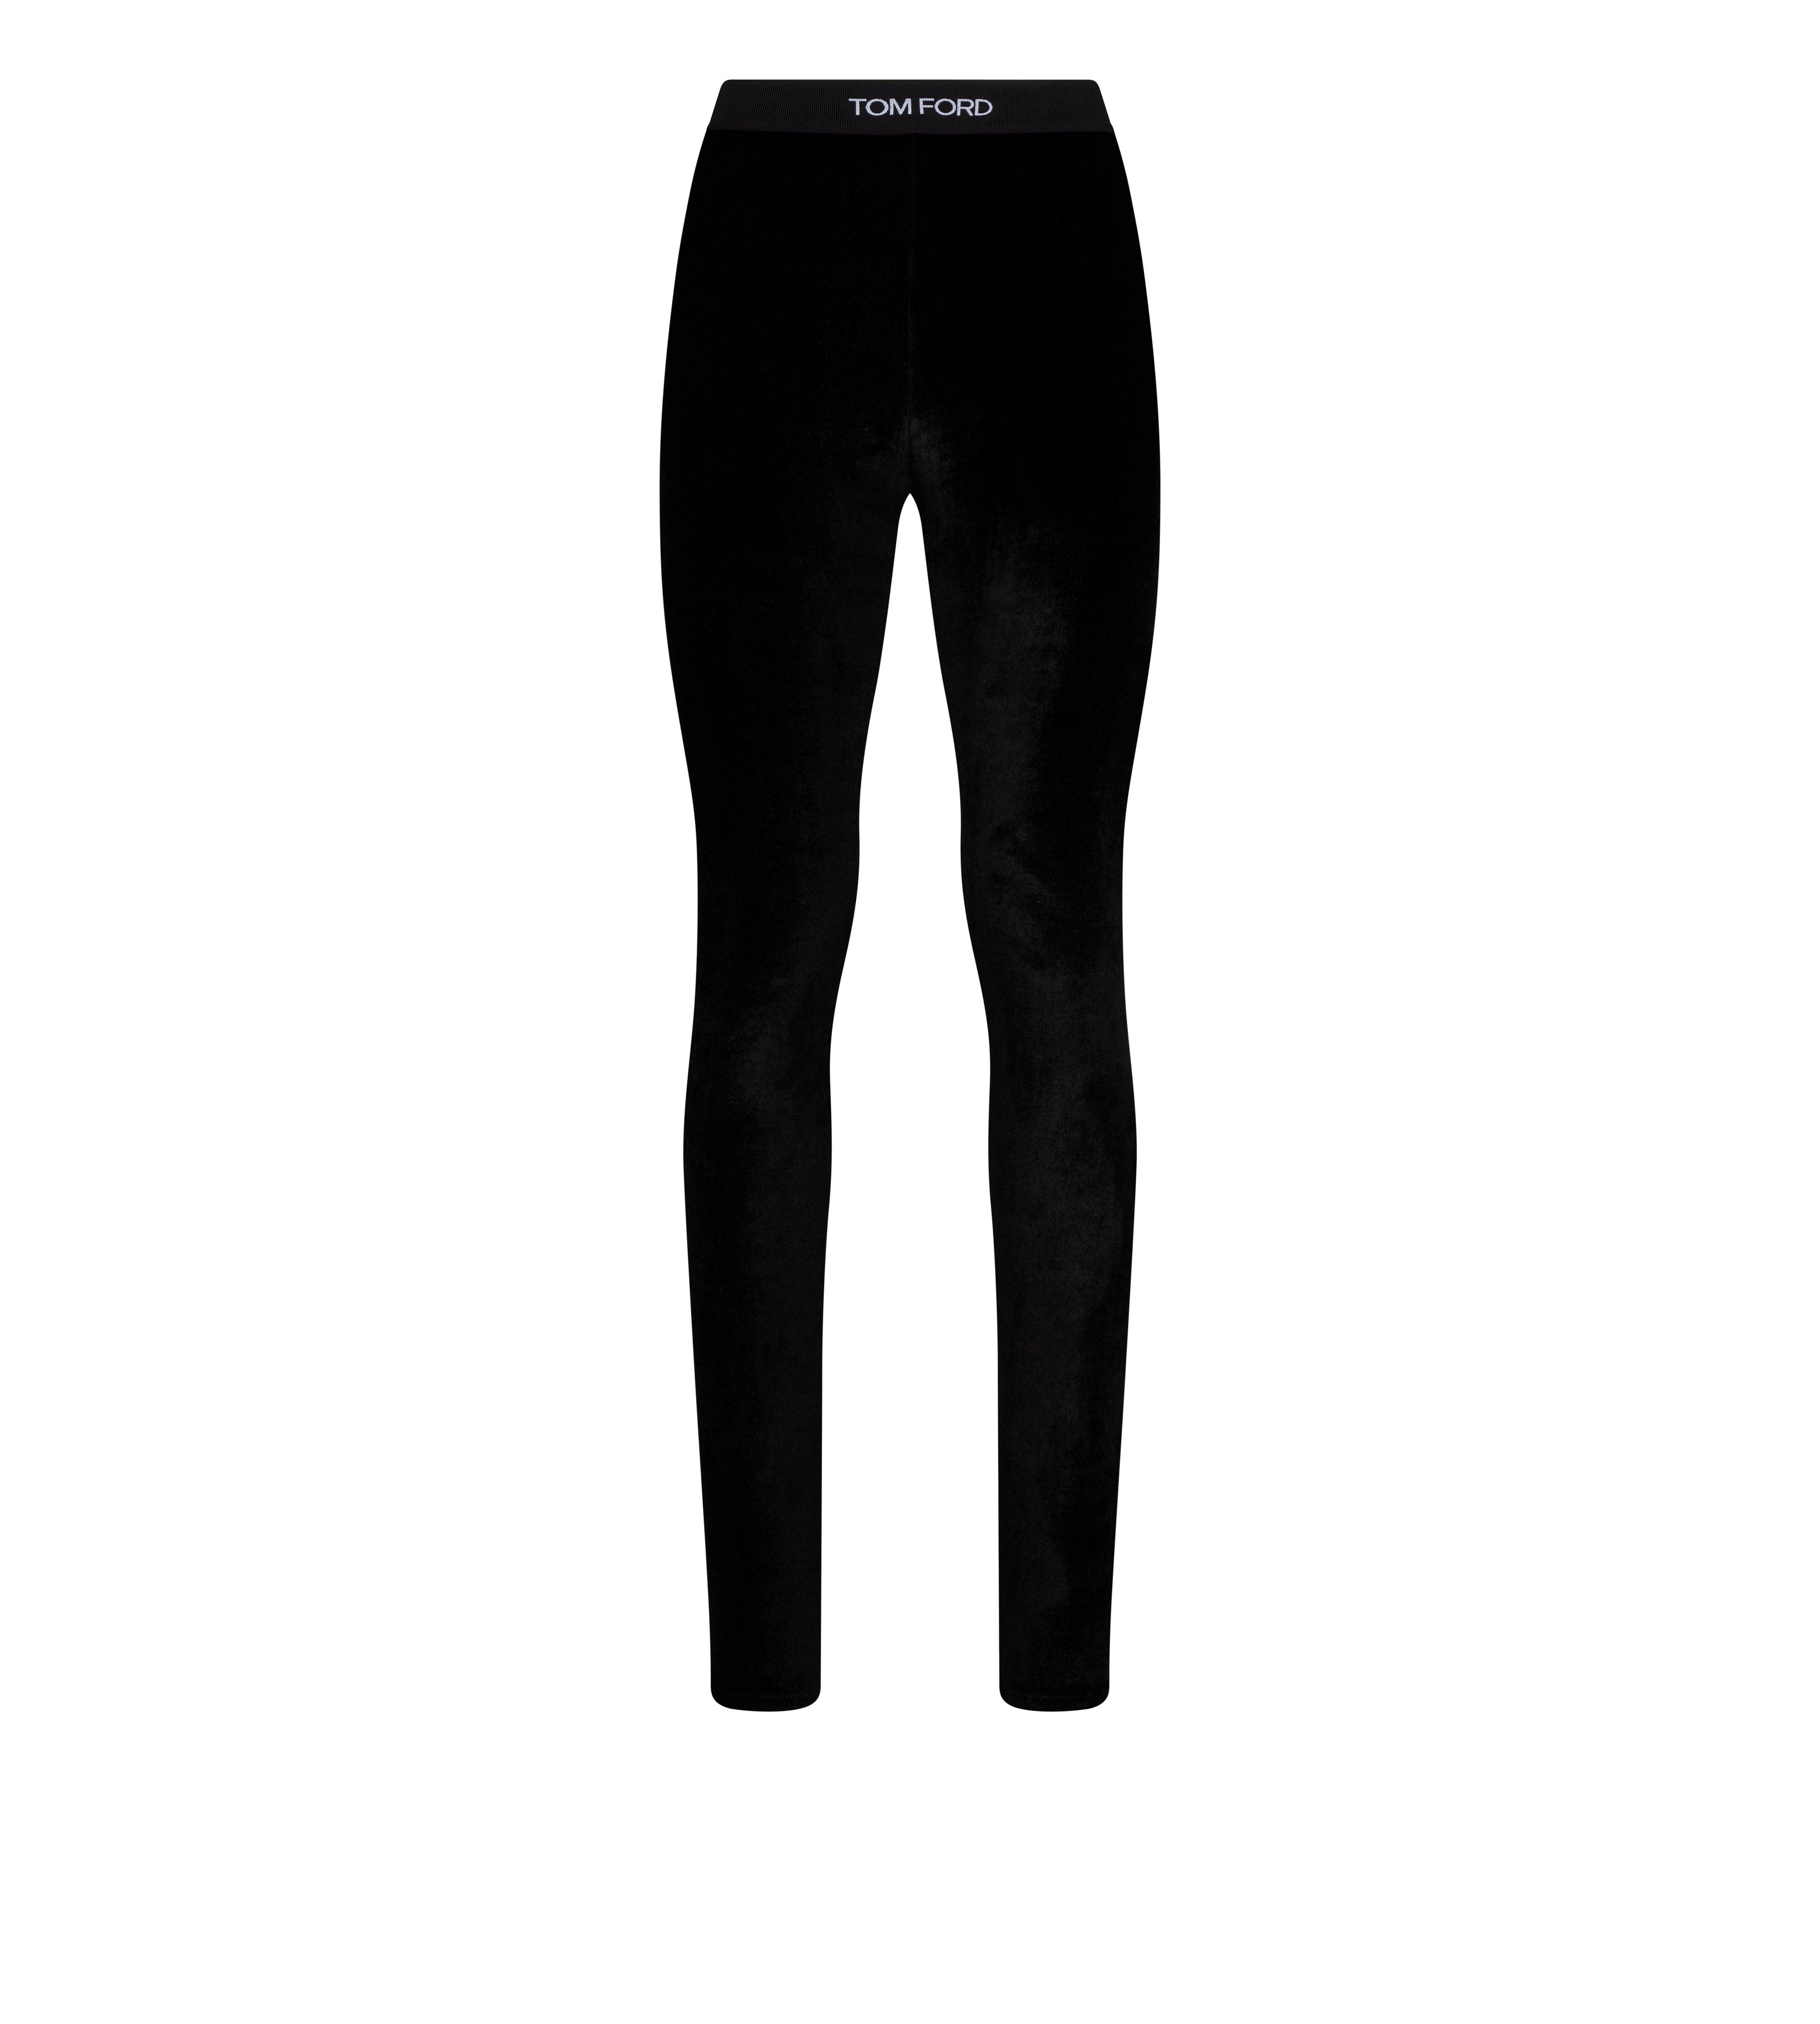 Blue Signature Leggings by TOM FORD on Sale